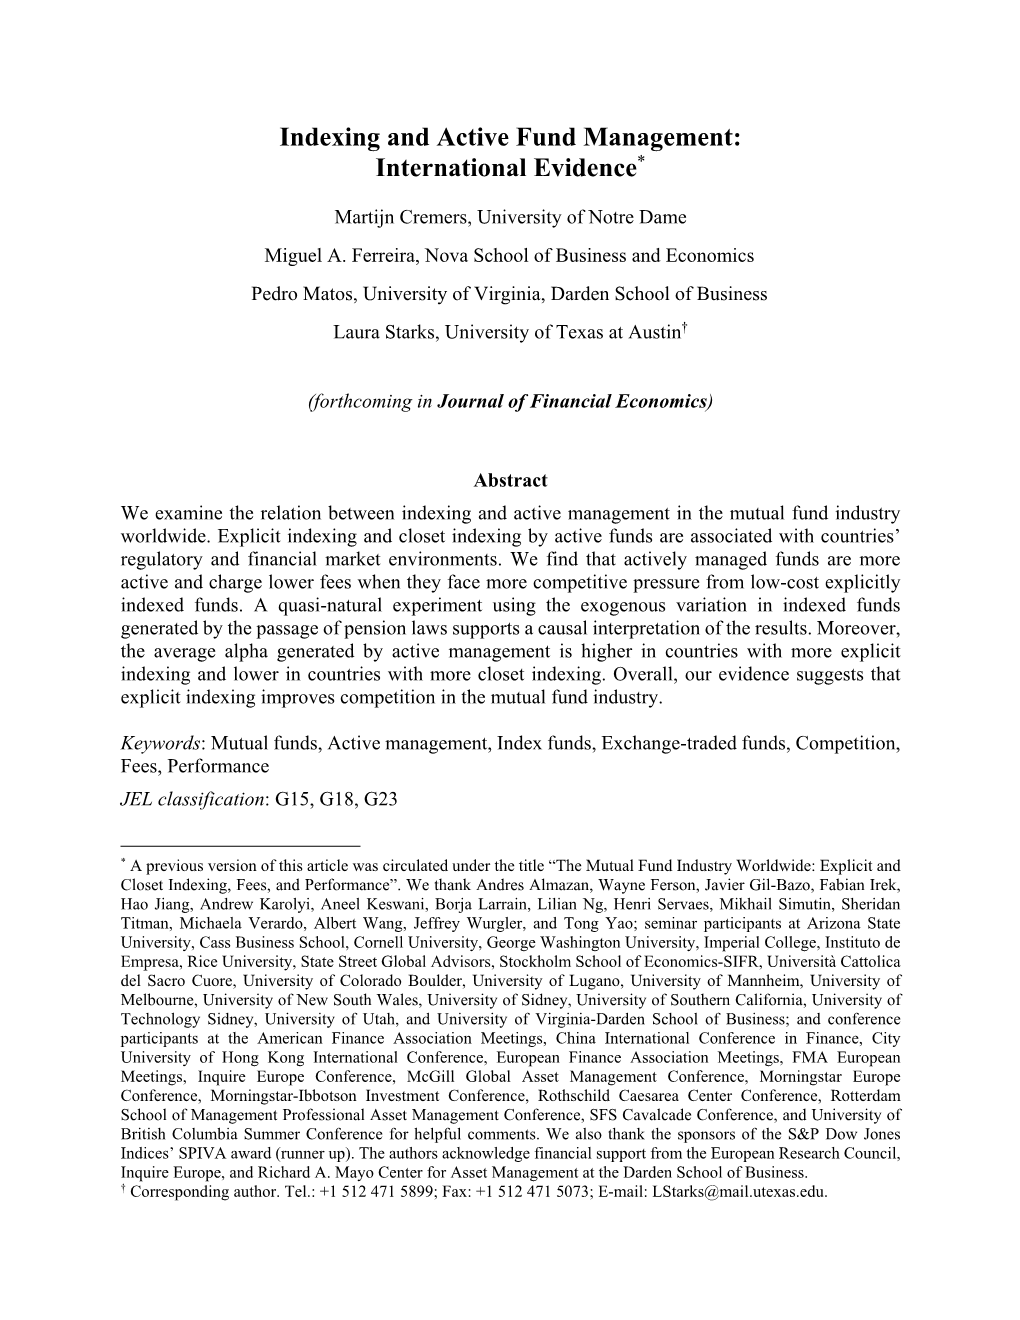 Indexing and Active Fund Management: International Evidence*